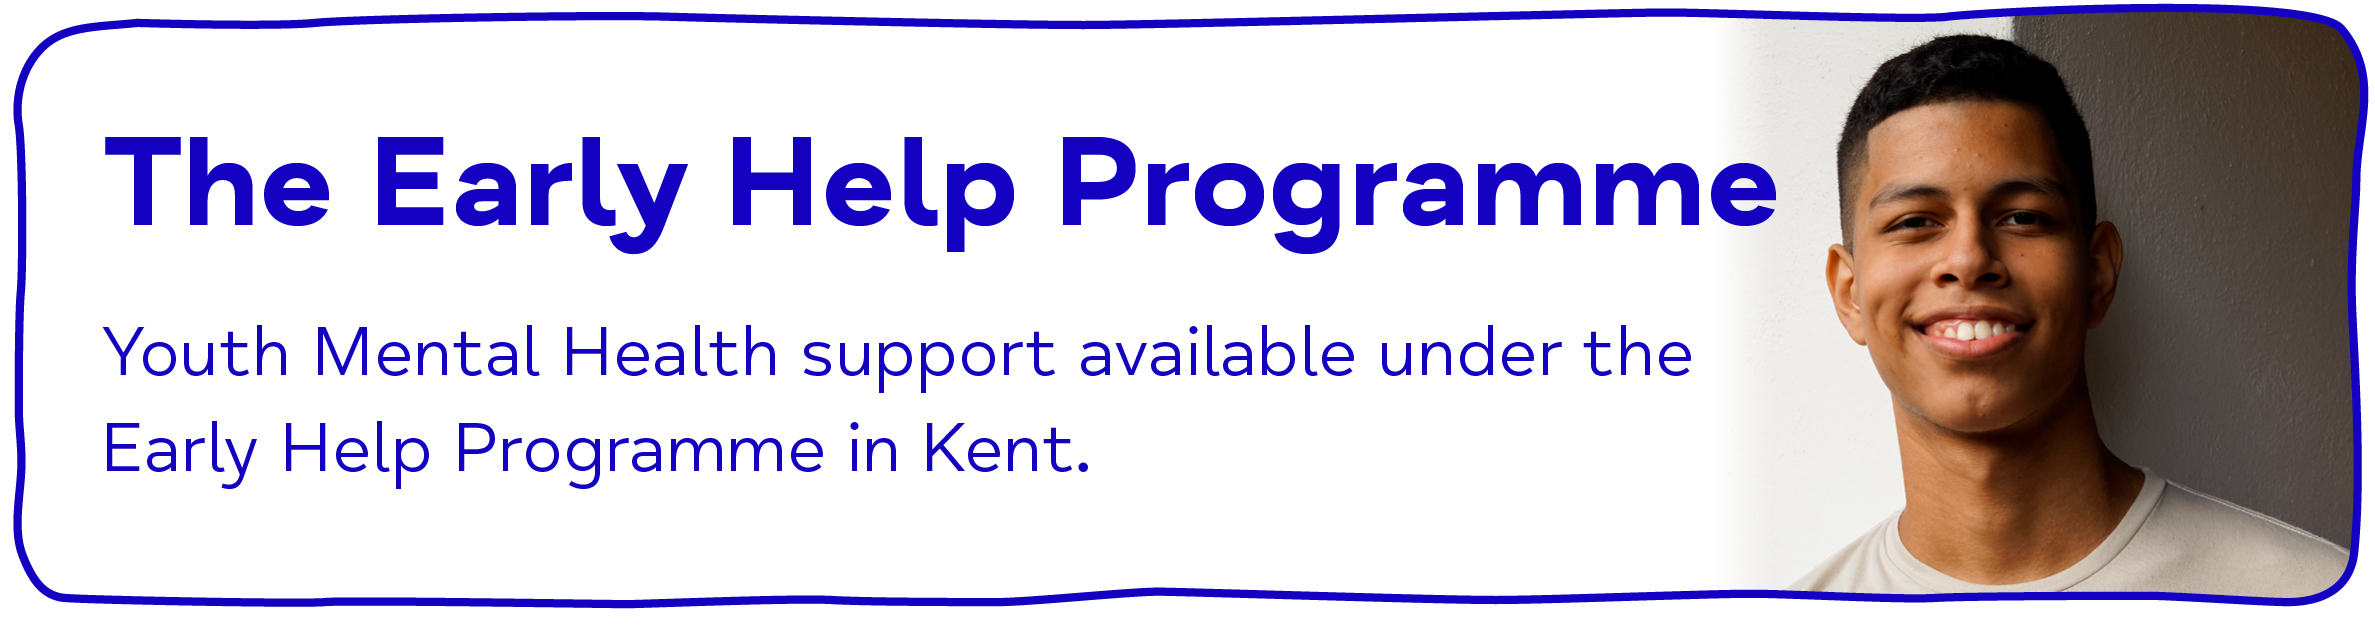 The Early Help Programme. Youth Mental Health support available under the Early Help Programme in Kent.